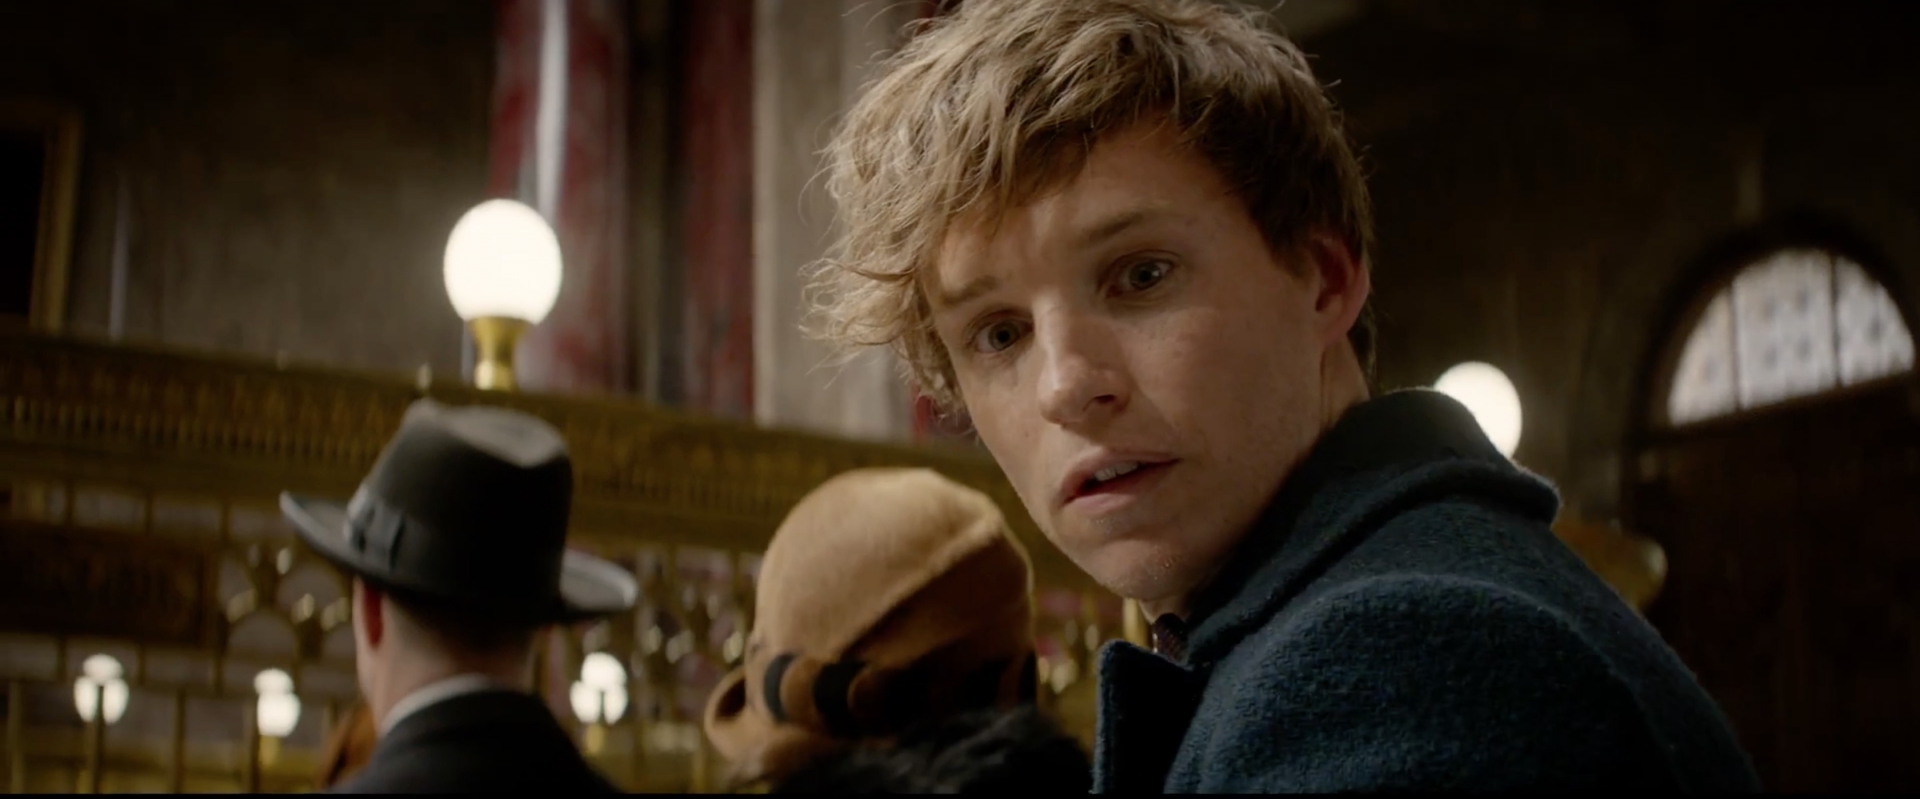 Fantastic Beasts And Where To Find Them Online Full-Length Film 2016